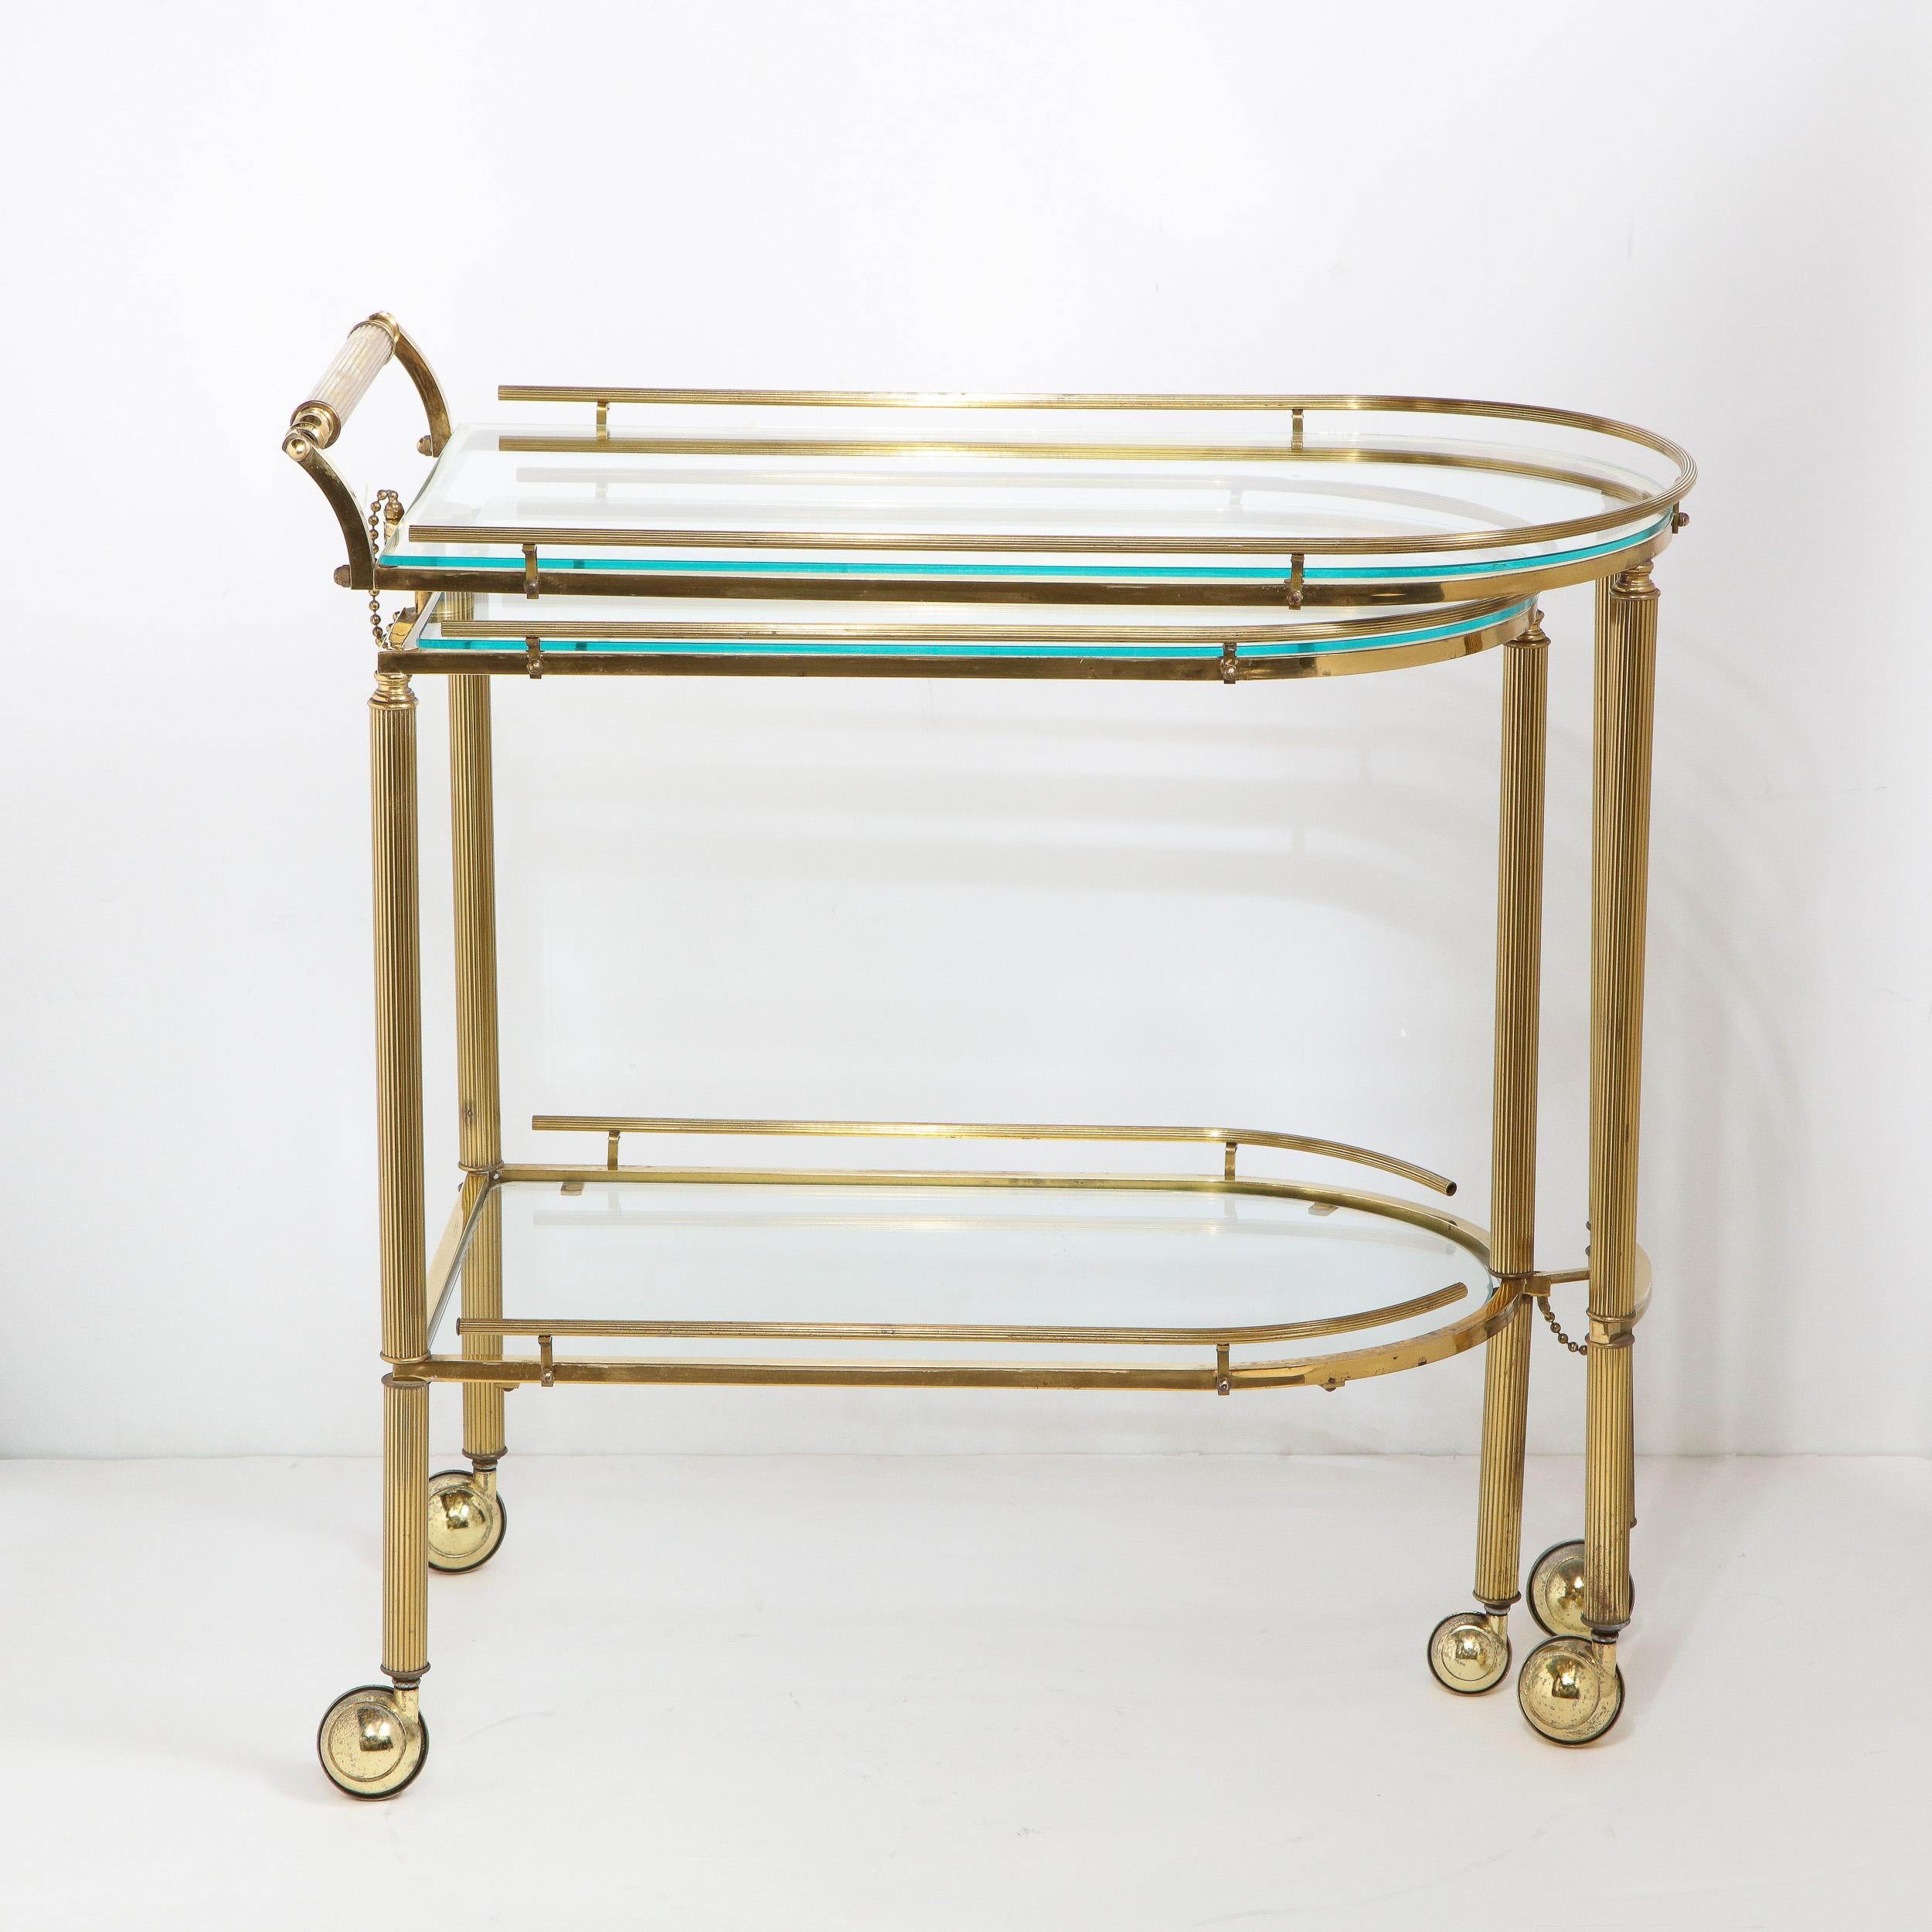 This refined Mid-Century Modern three tier articulating brass bar cart was realized in the United States, circa 1970. It features a bullet form silhouette consisting of two articulating demilune shaped tiers with translucent glass centers, that